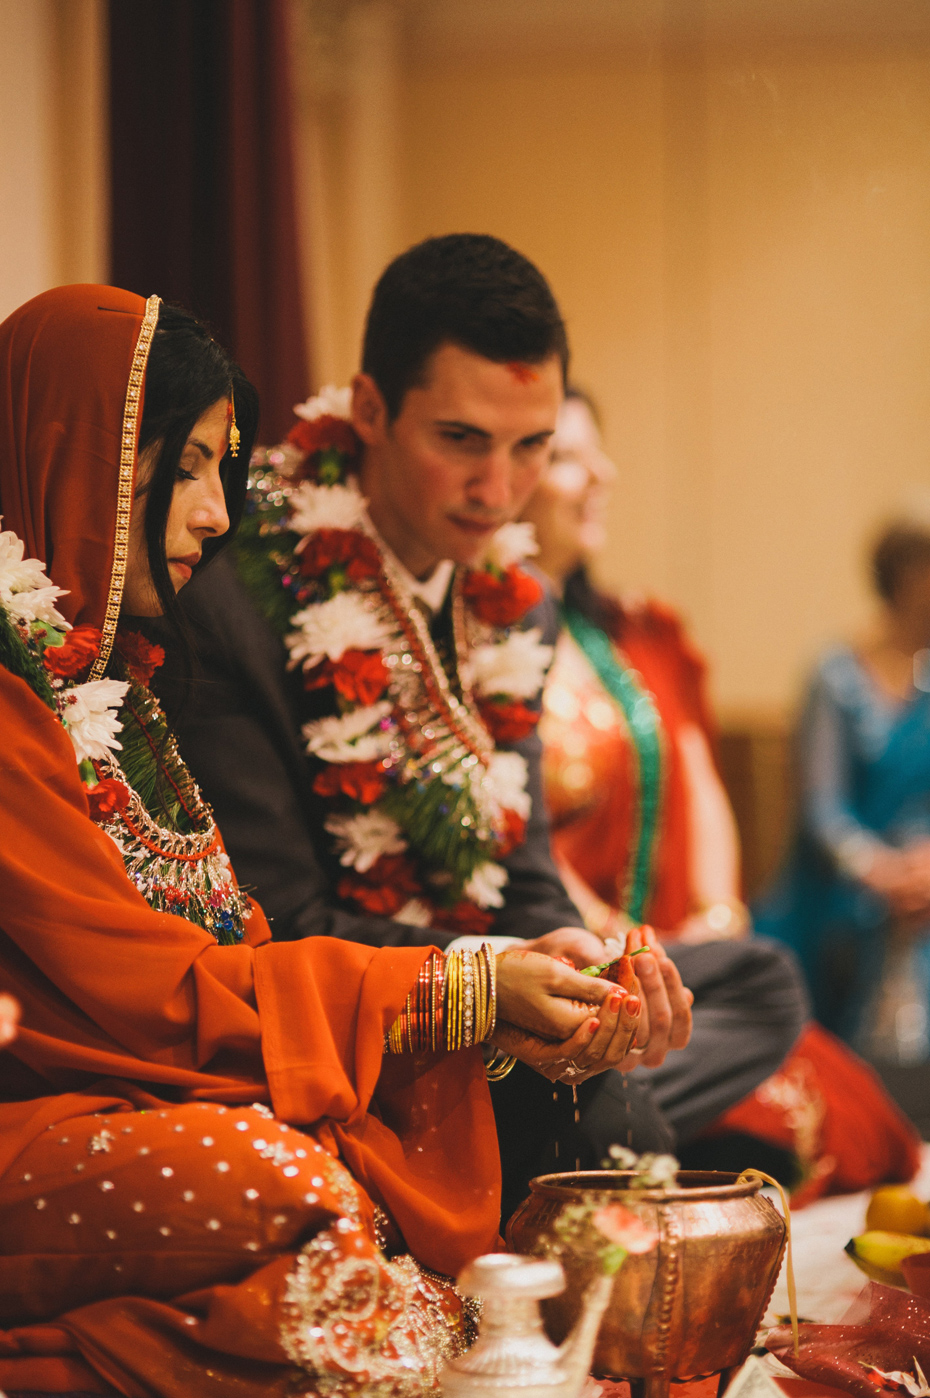 The bride and groom participate in a traditional Nepali Hindu wedding ceremony.